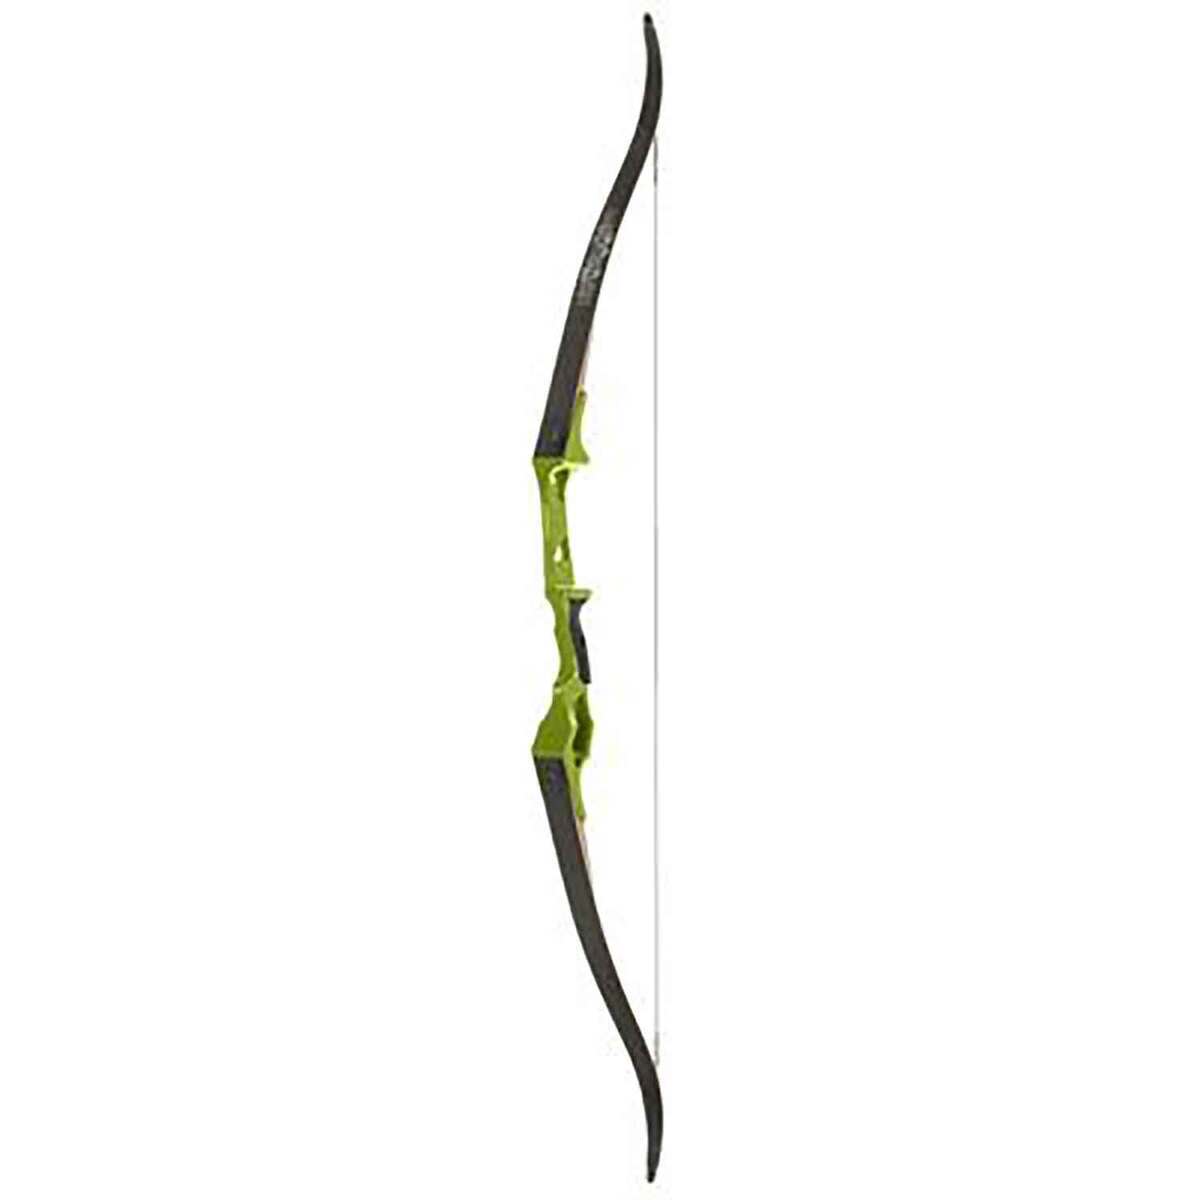 Bowfishing Bows & Accessories, Home